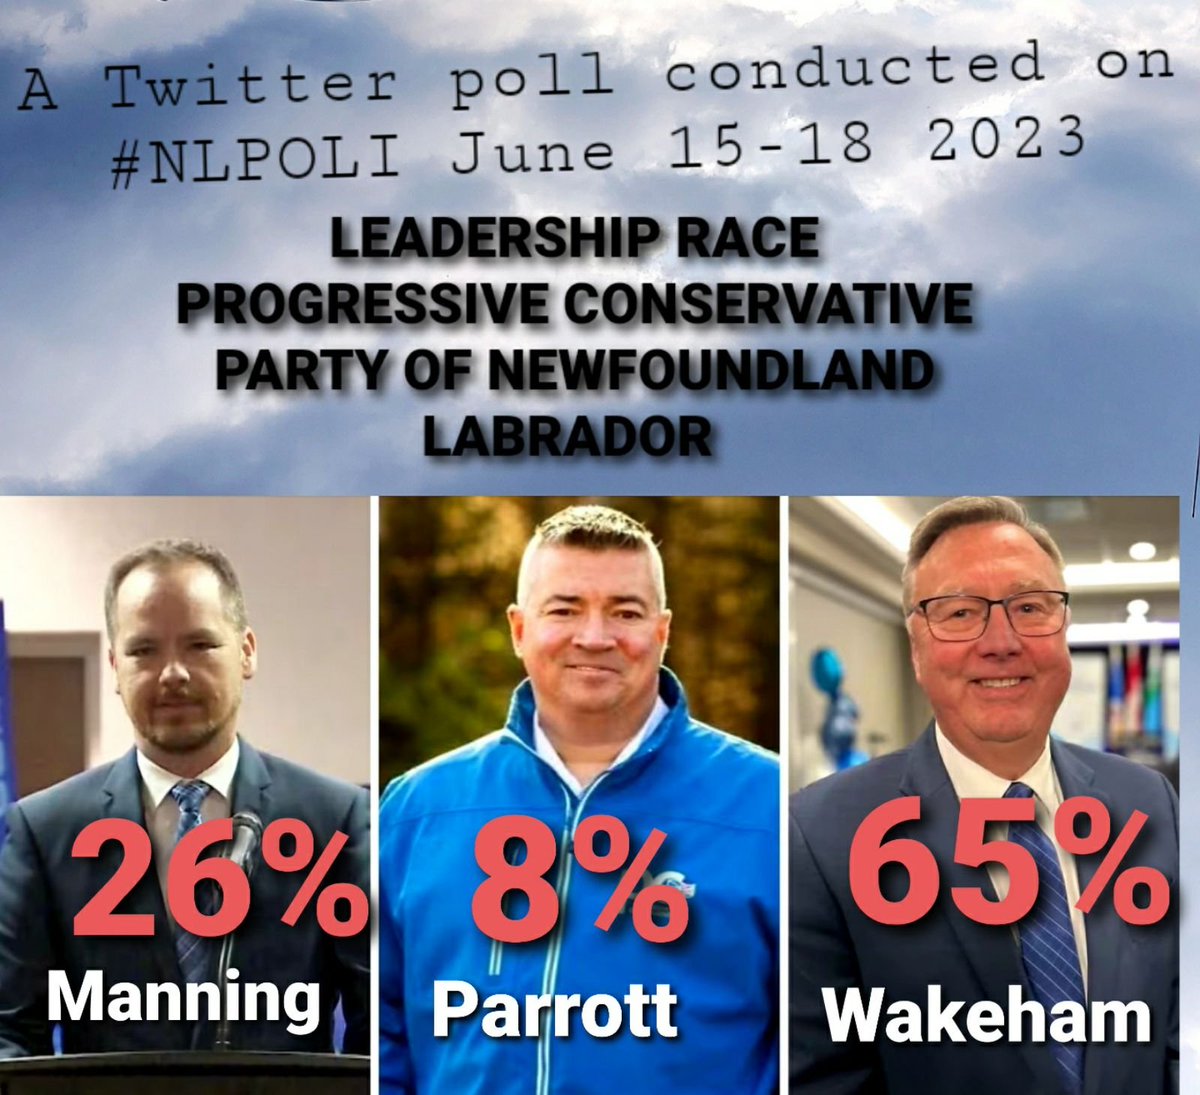 Believe it or not these poll results are a reality  #nlpoli #nlwx #nltraffic and among decided voters